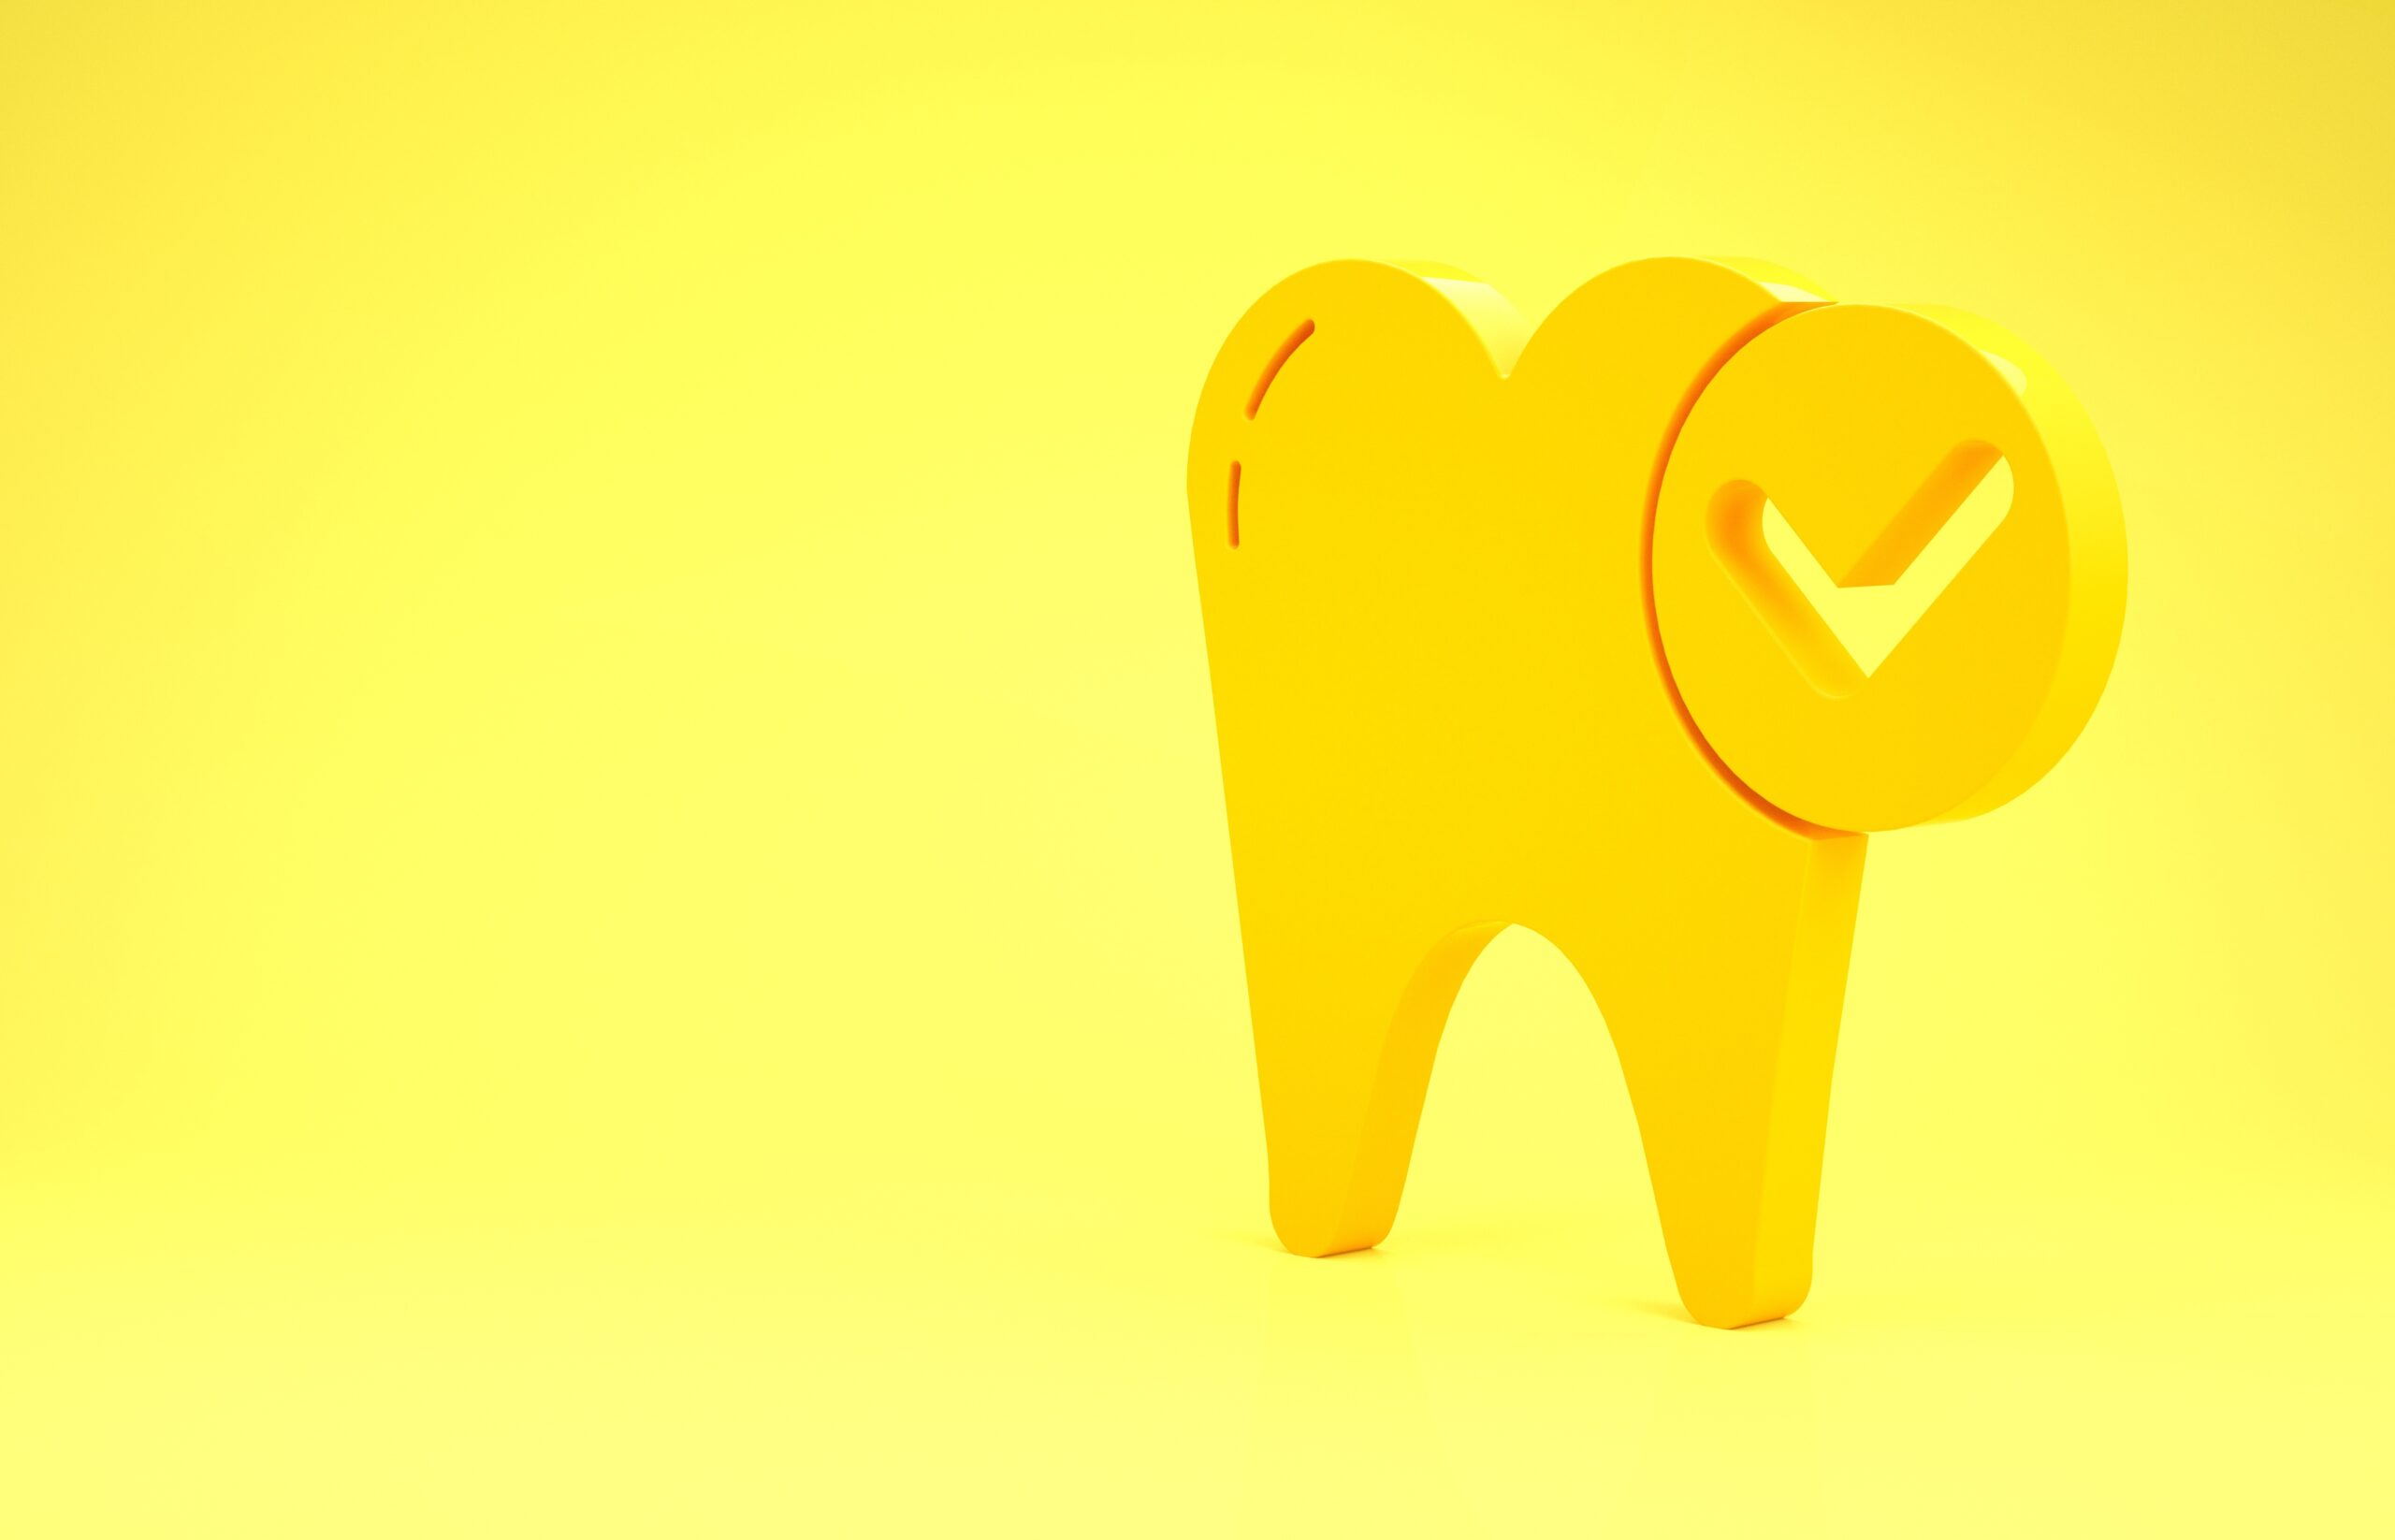 Yellow Tooth whitening concept icon isolated on yellow background. Tooth symbol for dentistry clinic or dentist medical center. Minimalism concept. 3d illustration 3D render